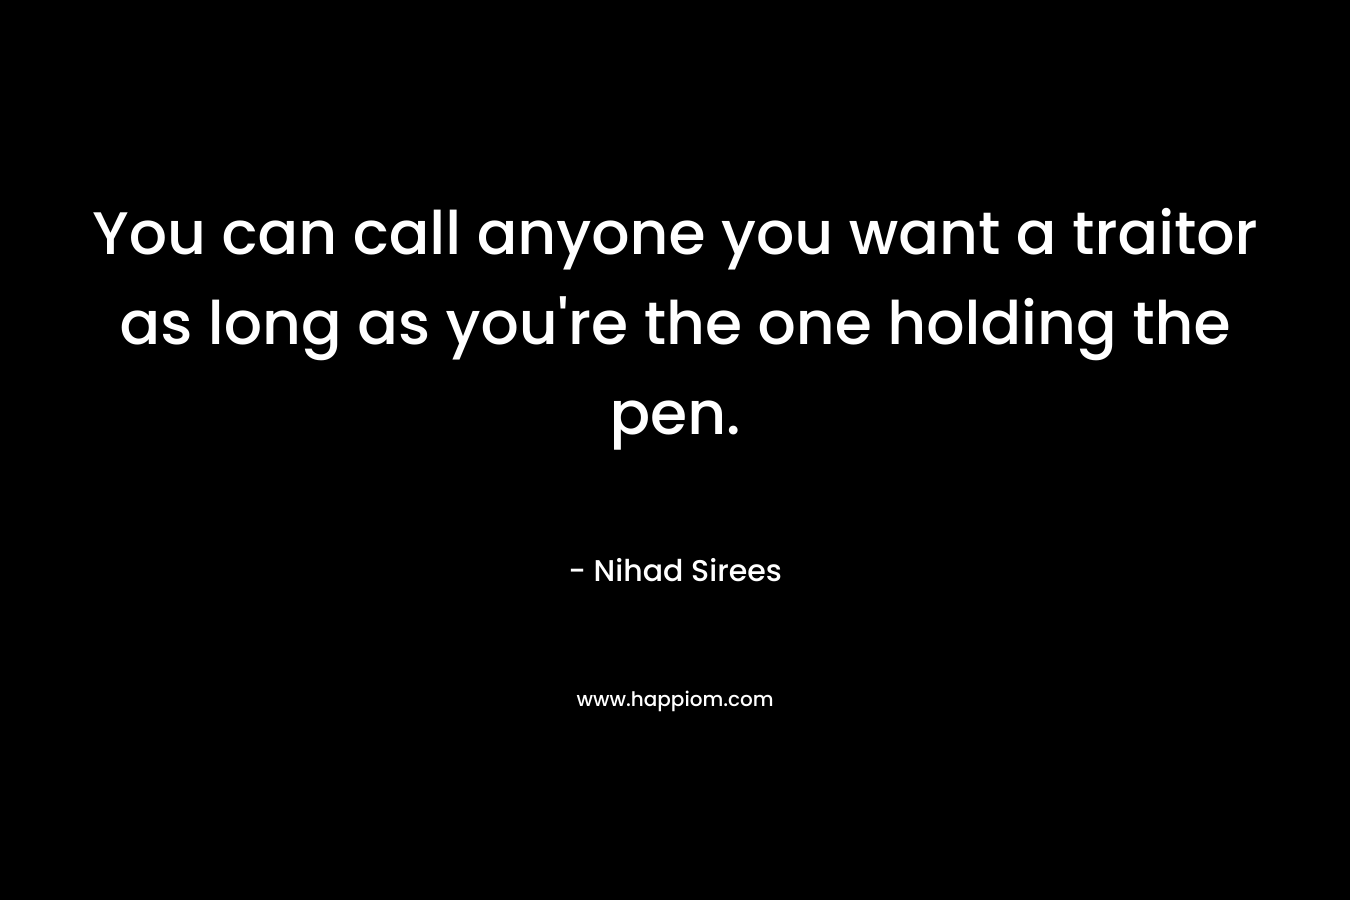 You can call anyone you want a traitor as long as you're the one holding the pen.